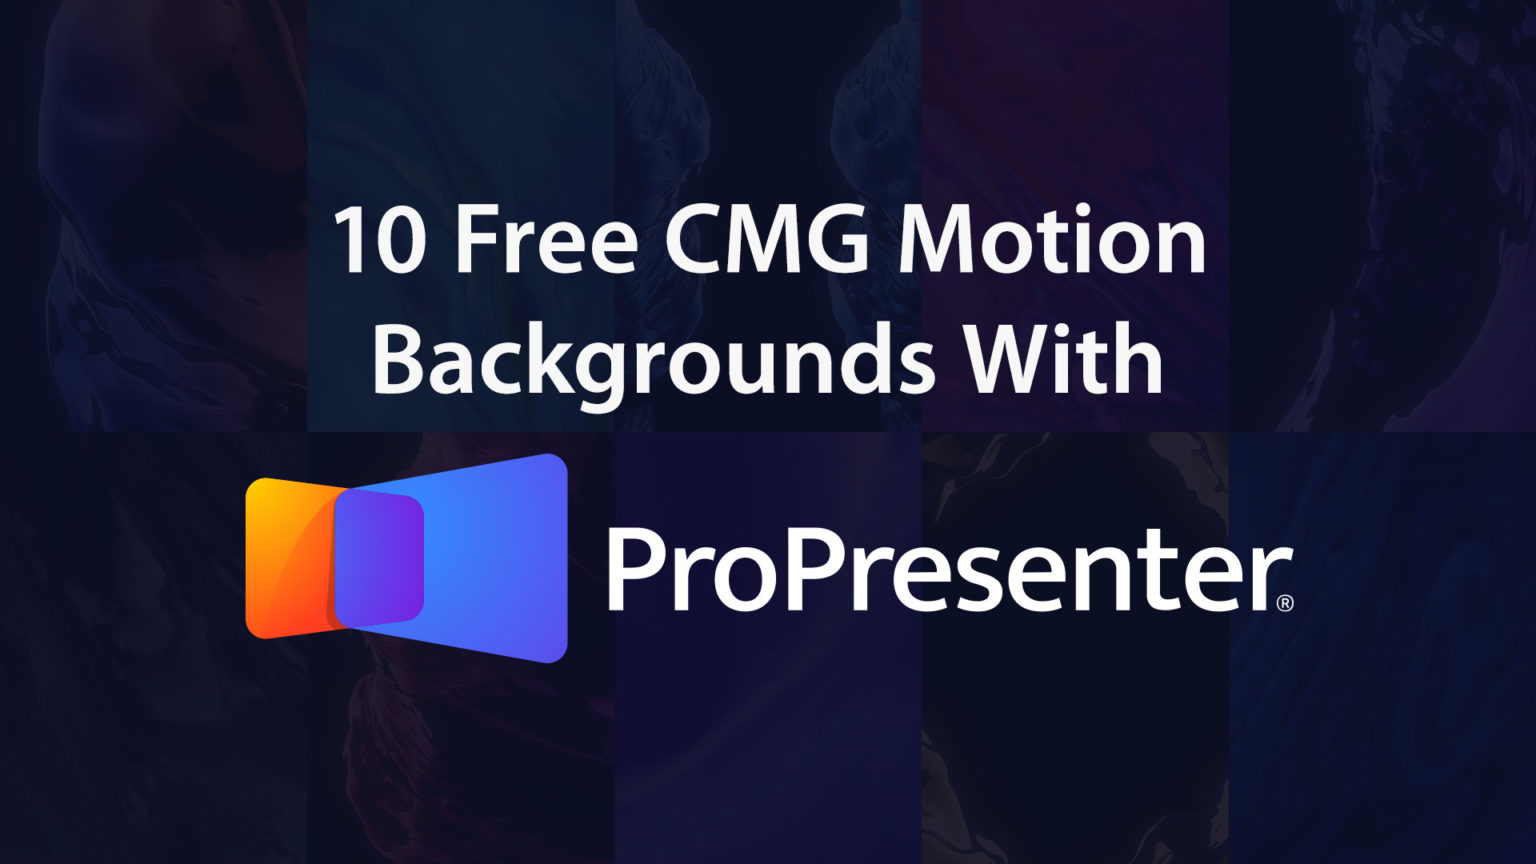 propresenter motion backgrounds free